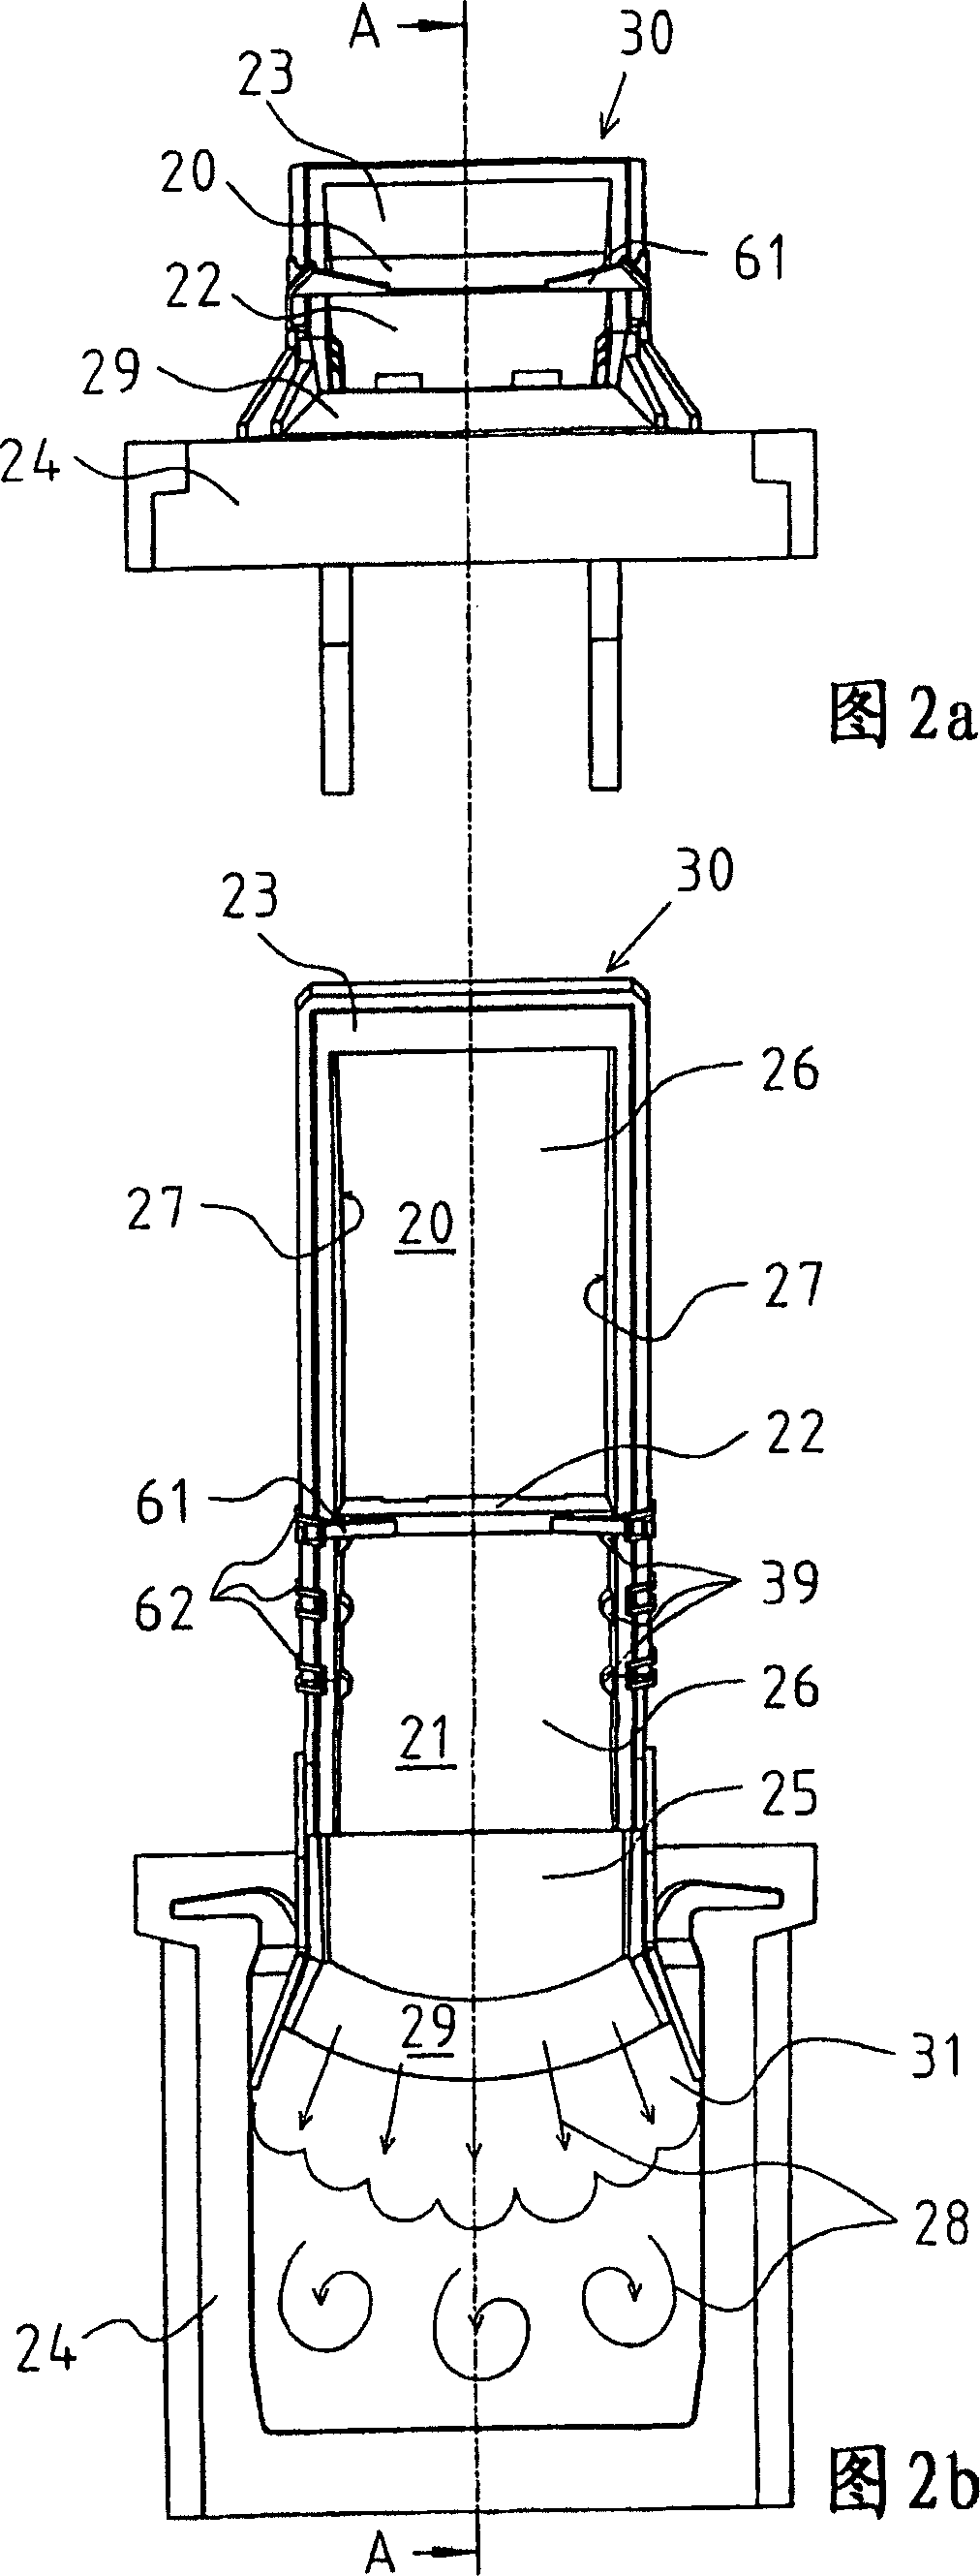 Casting trough and method for casting copper anodes